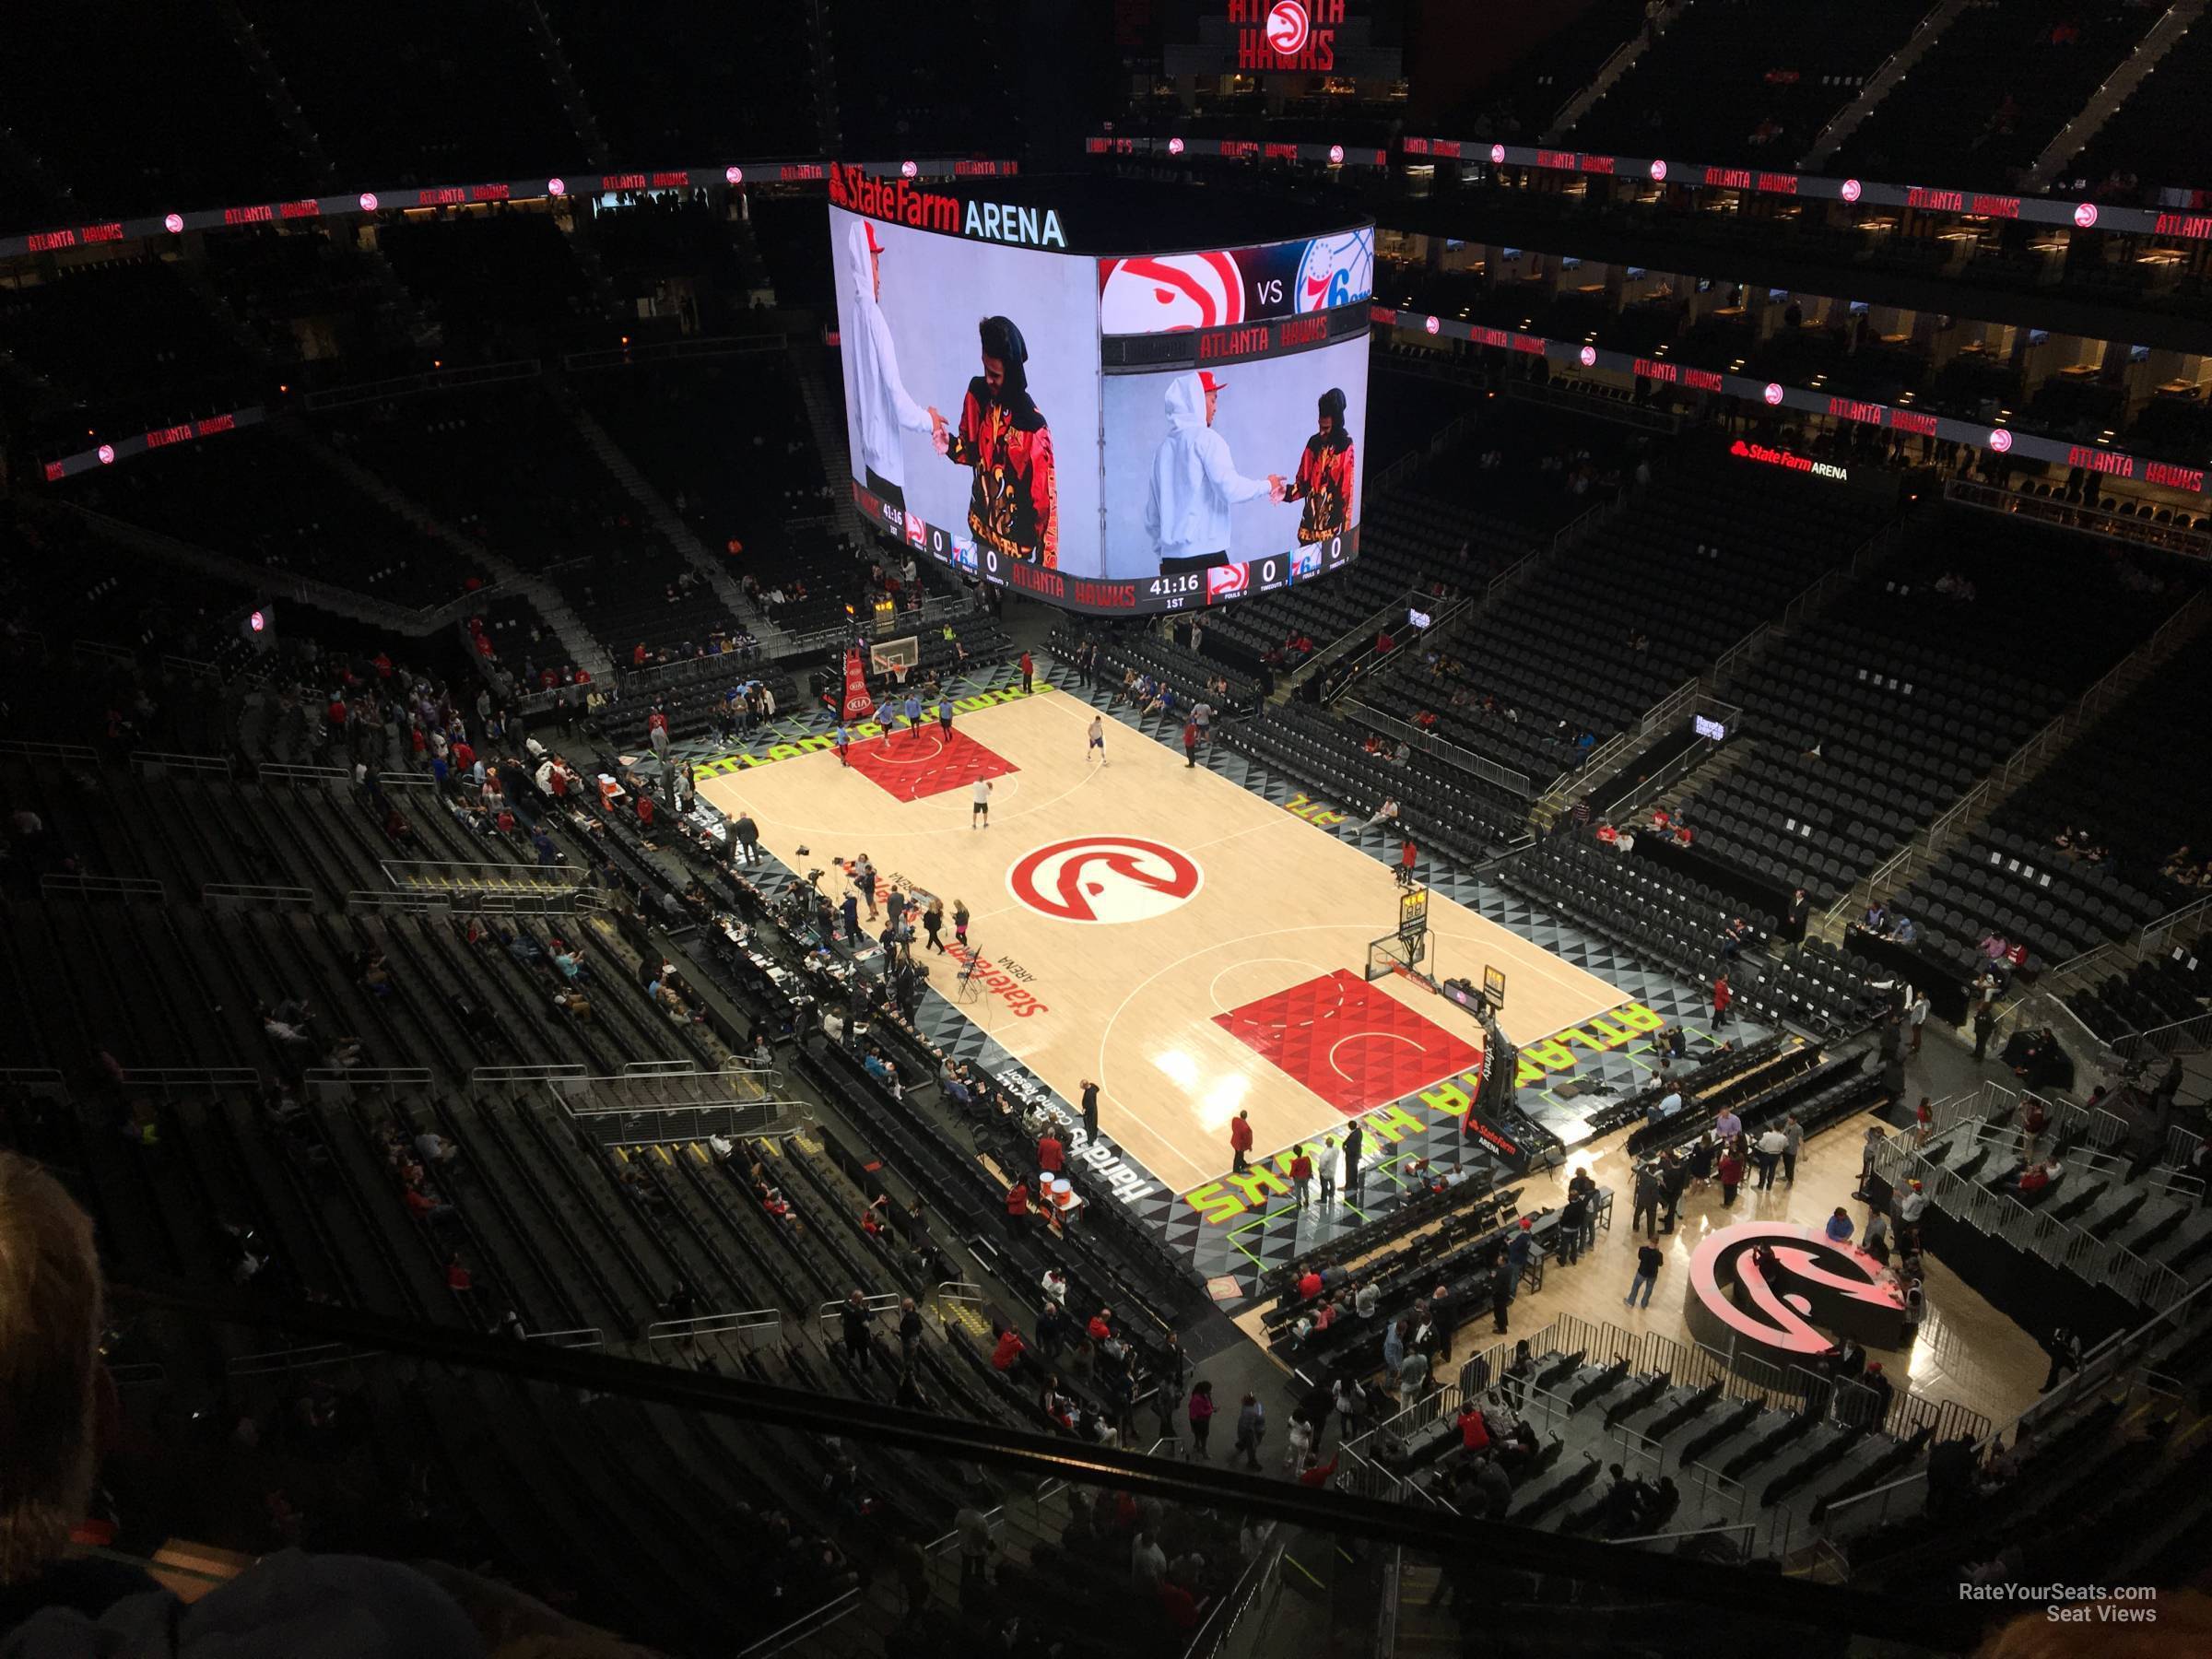 section 218, row a seat view  for basketball - state farm arena